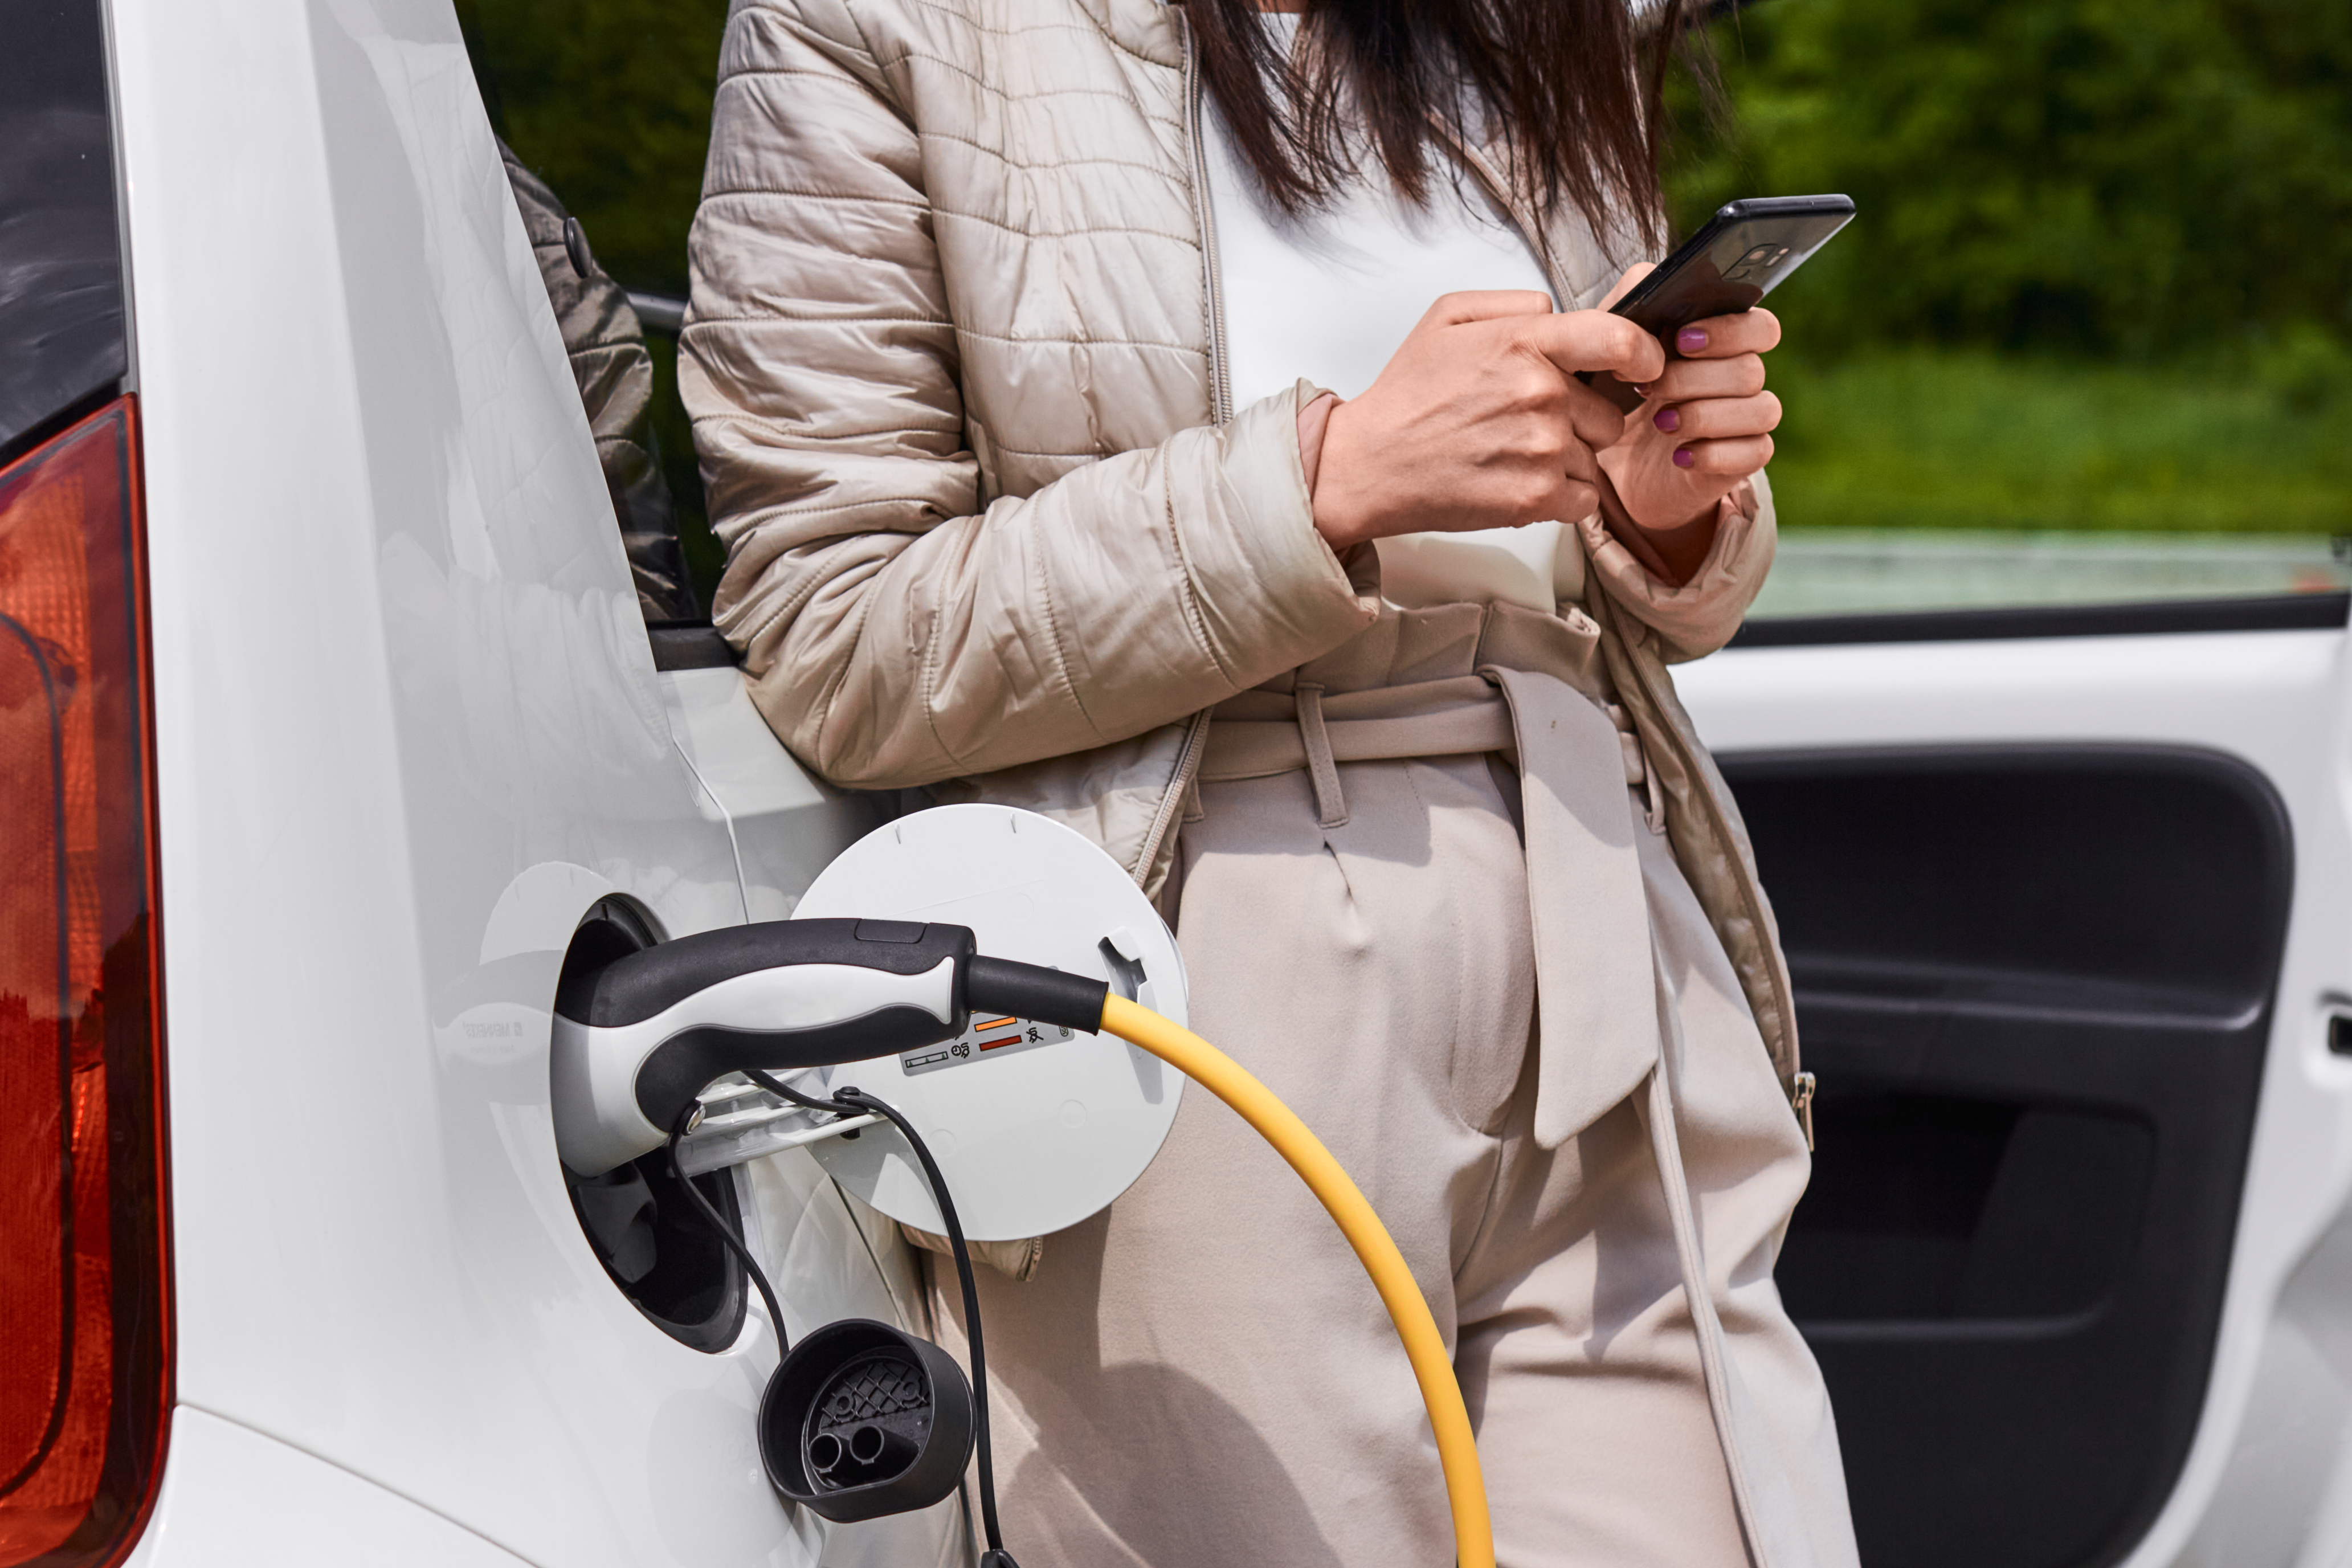 Young woman standing near the electric car with mobile phone in her hand and waiting for recharging of the automobile battery.